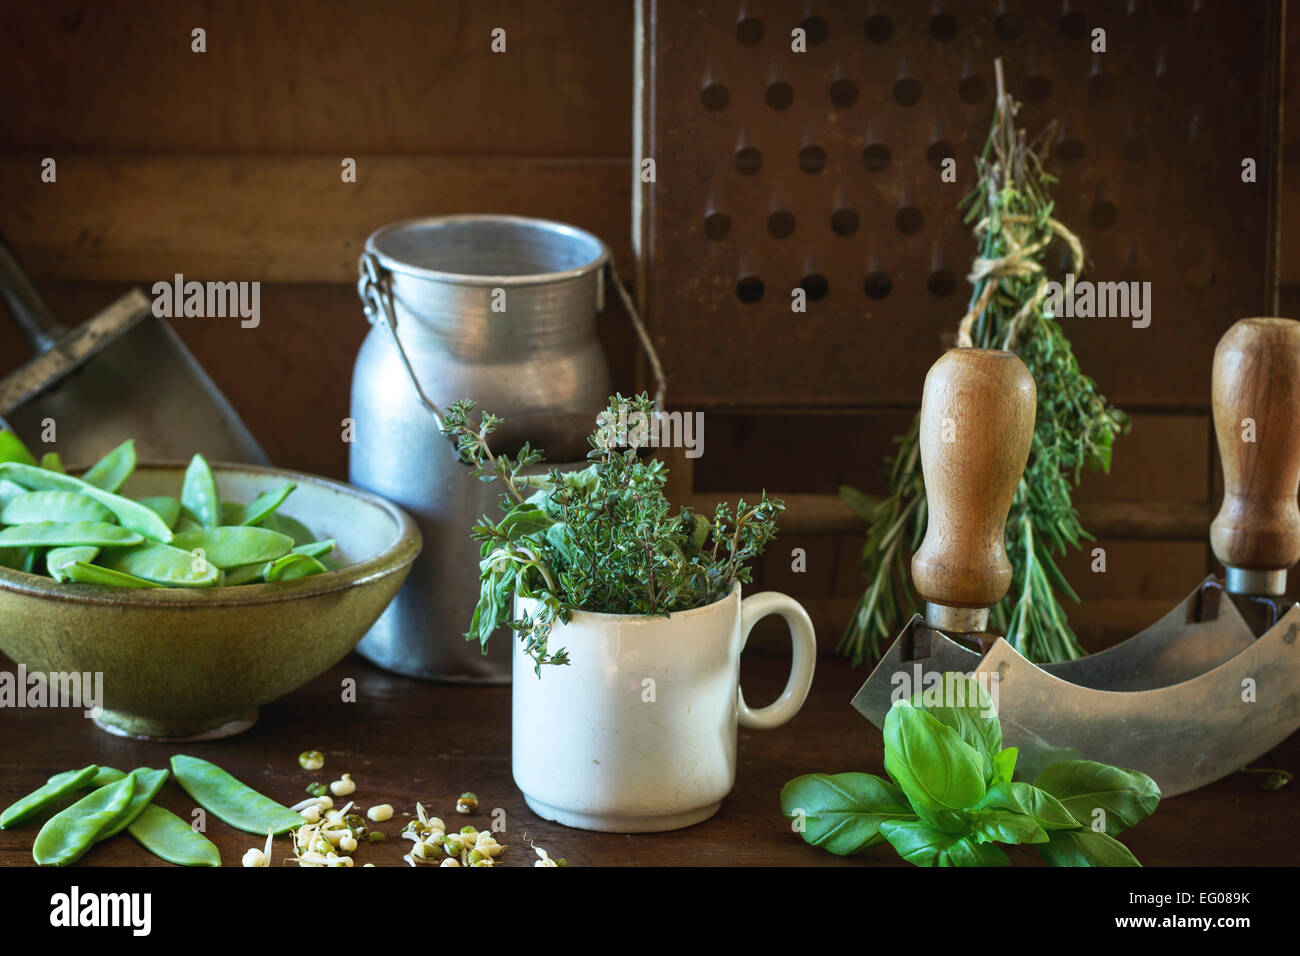 Young sweet peas and mix of herbs rosemary and basil with vintage kitchen utensil over wooden table Stock Photo